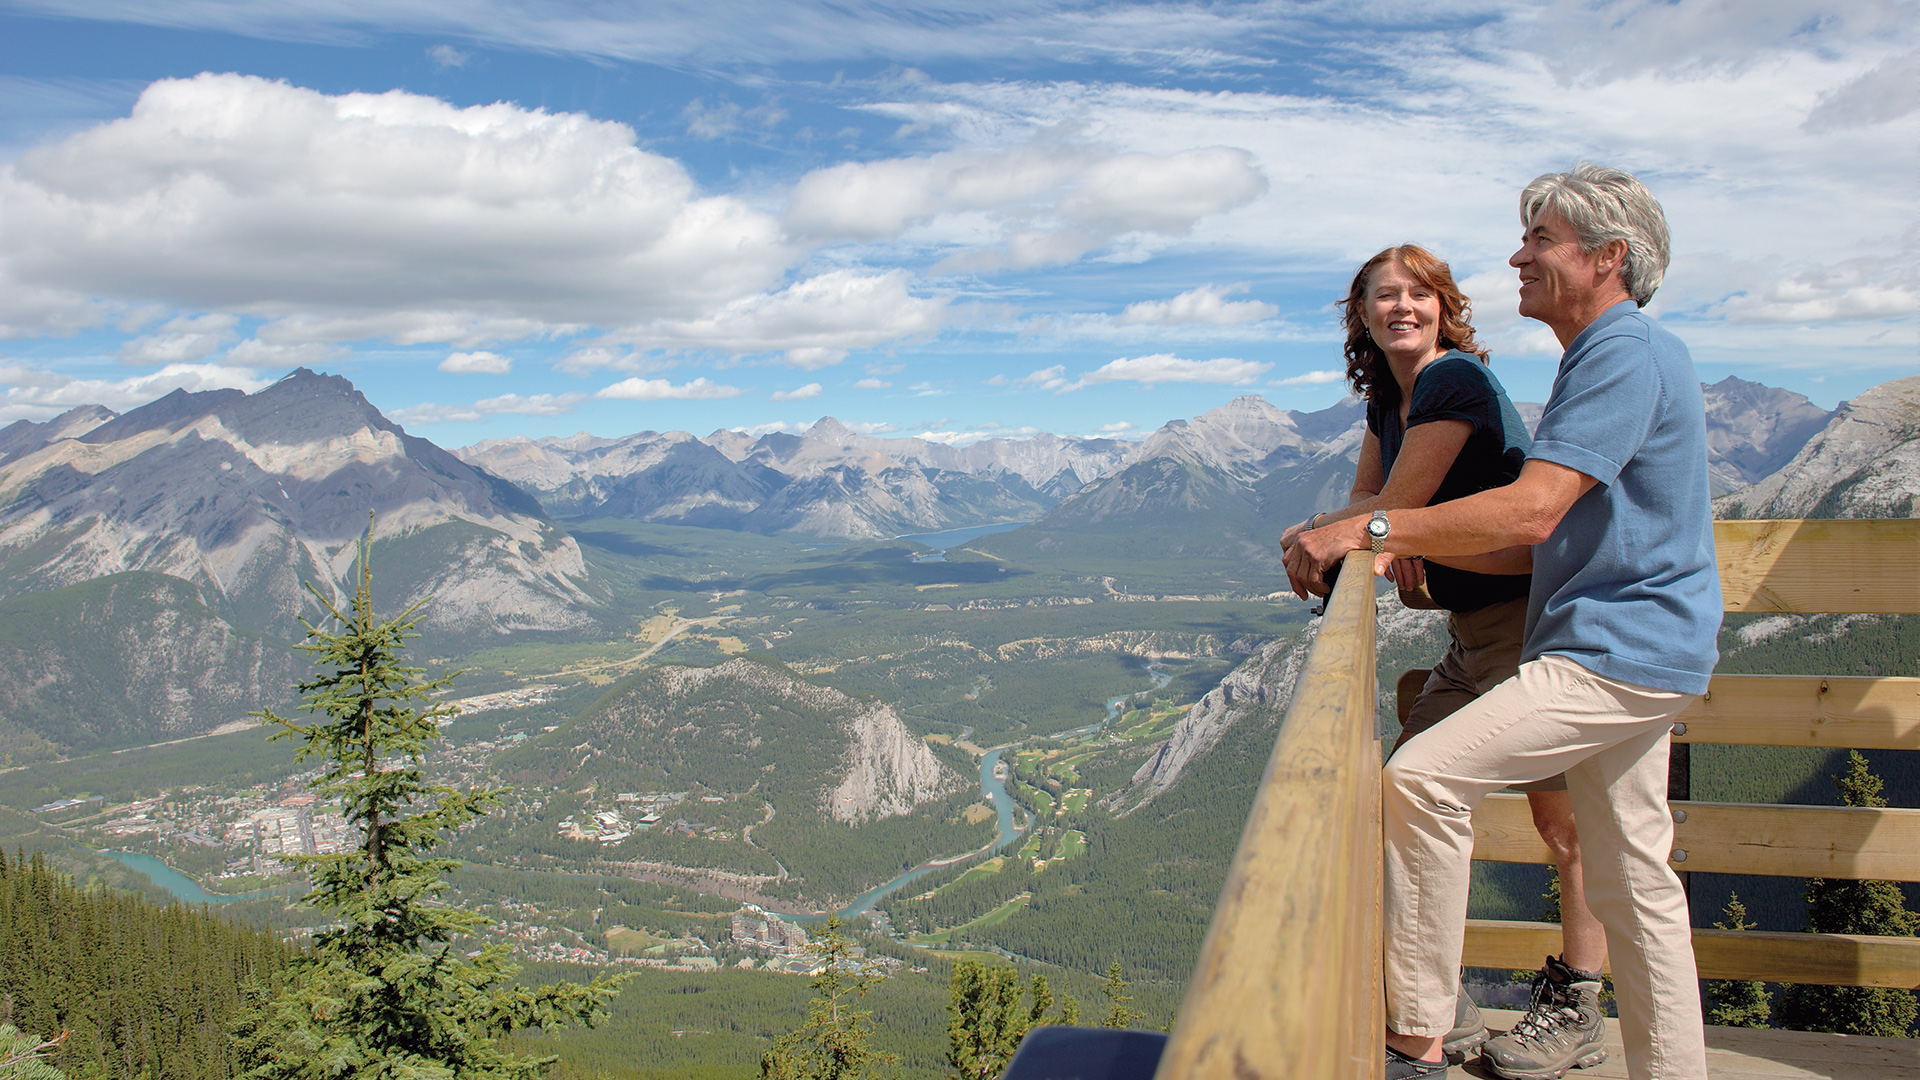 Two people enjoying the Banff view from a Brewster Gondola viewing platform.